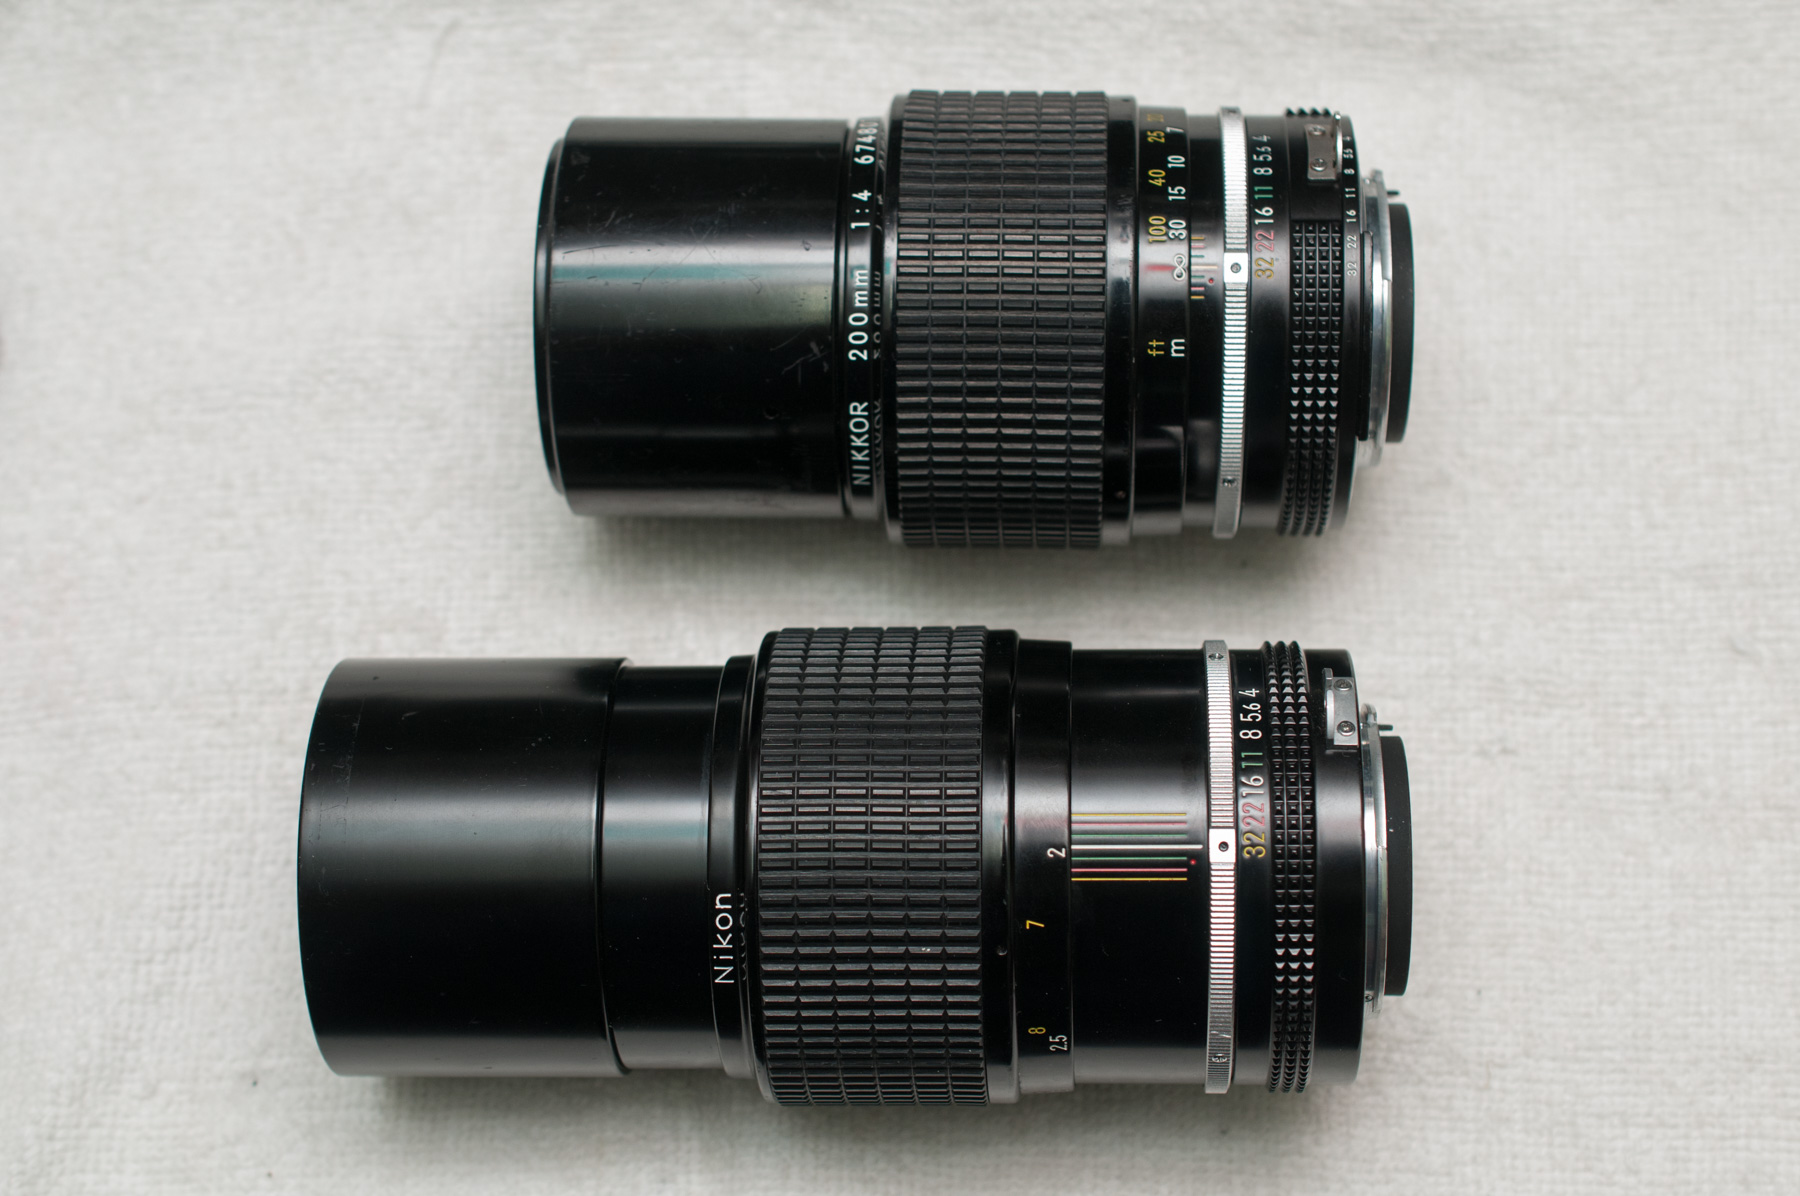 200mm f/4 K Disassembly, Overhaul and Clean-up – My Take on